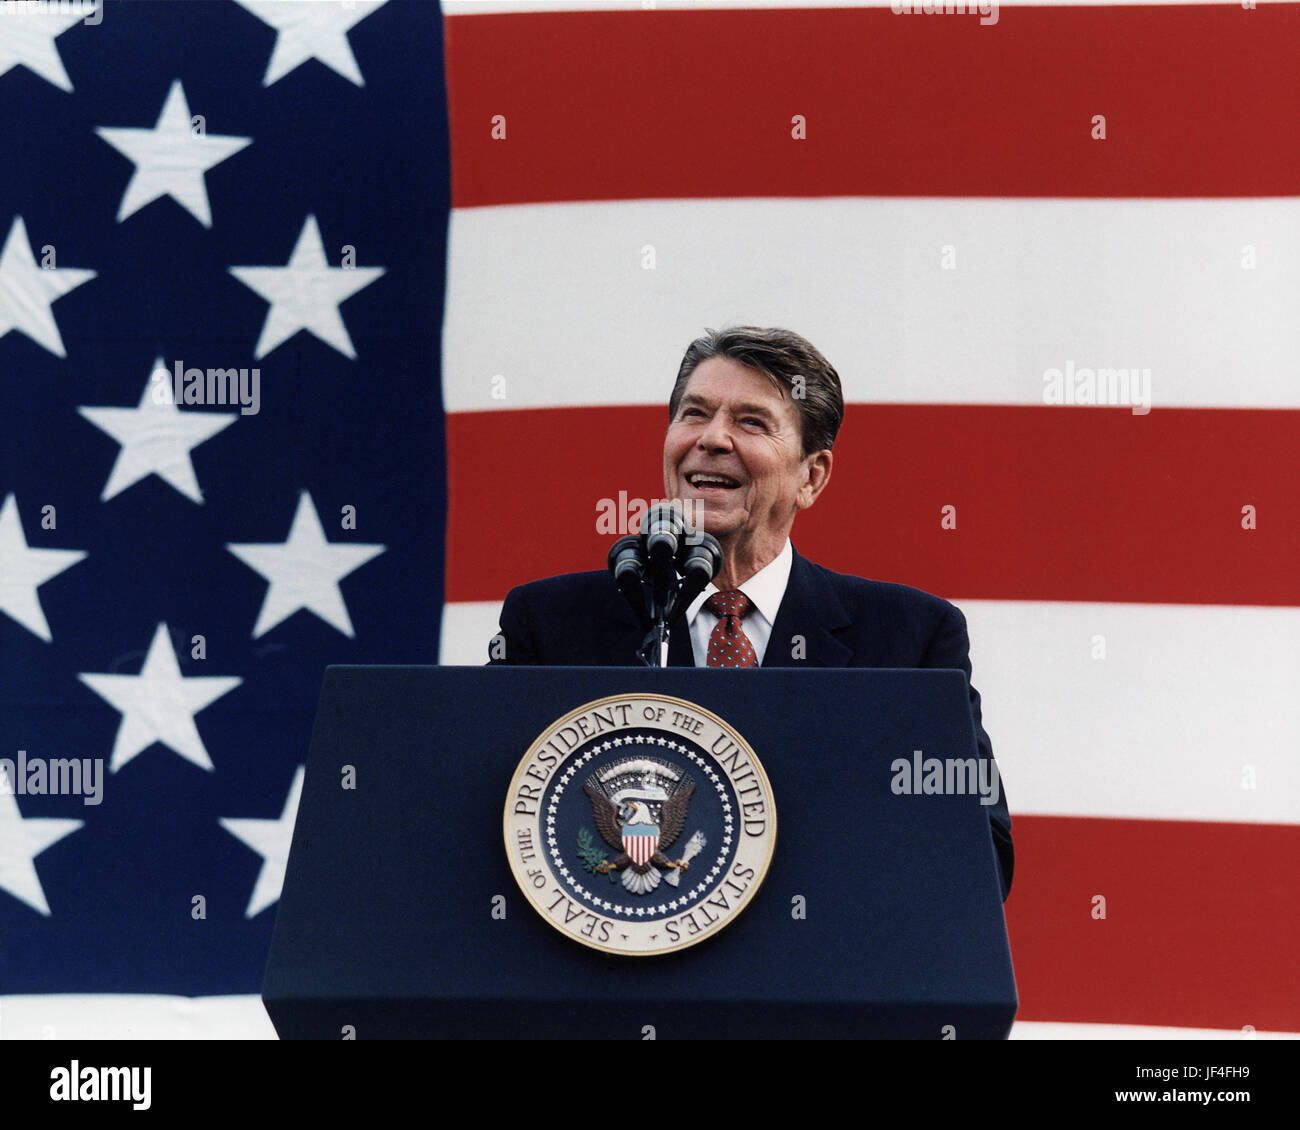 President Ronald Reagan speaks from the presidential podium before a huge American flag. Stock Photo